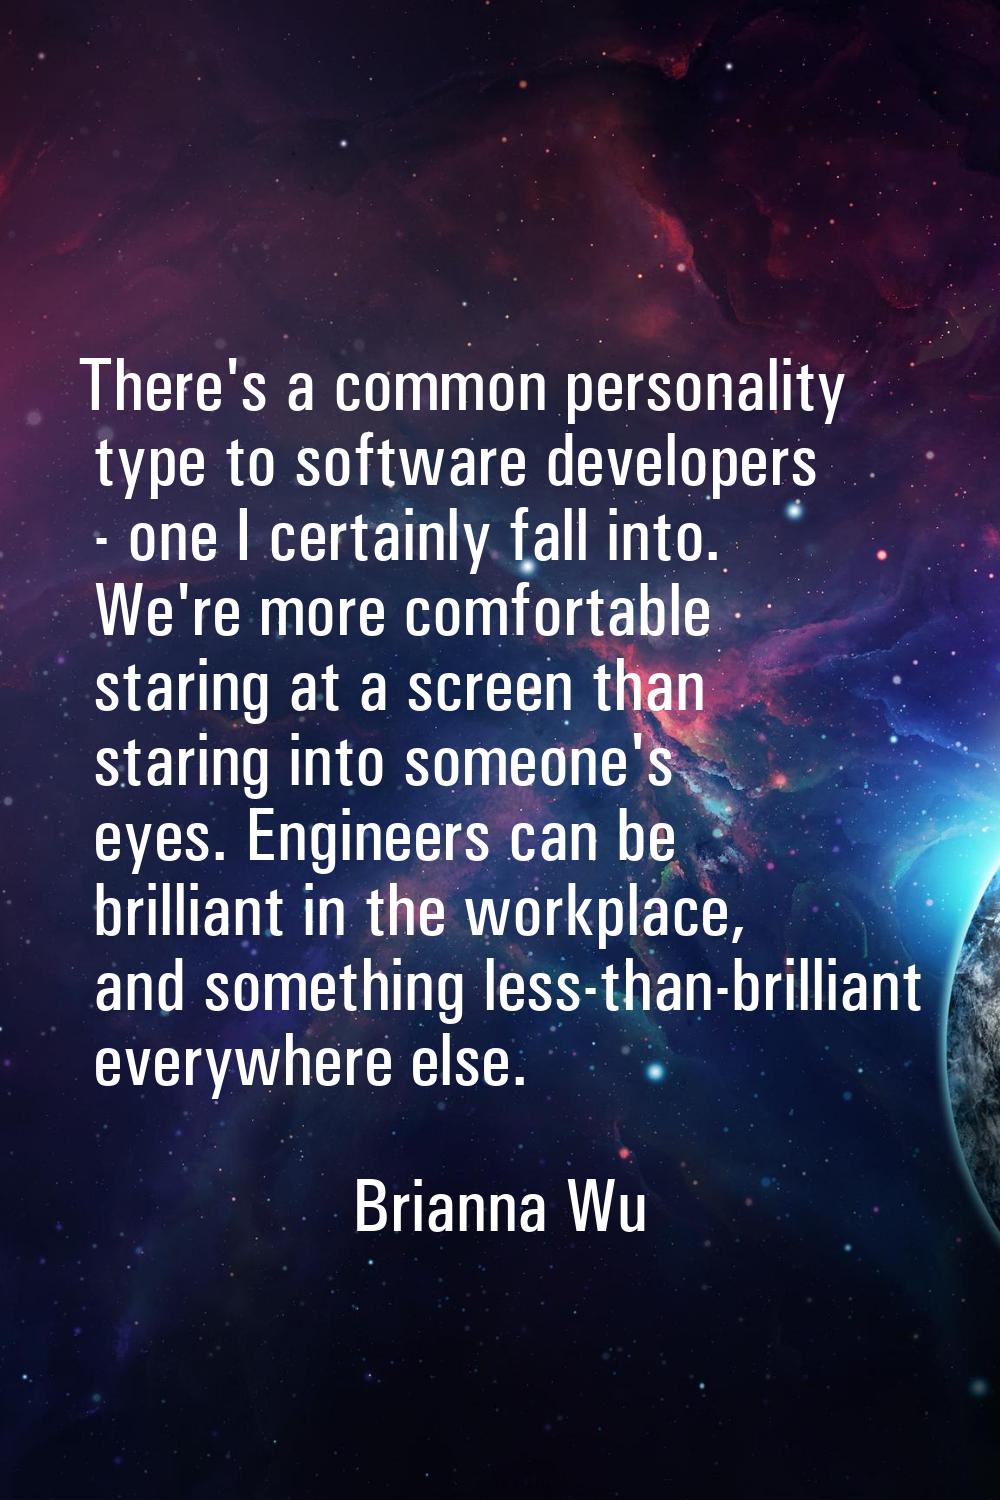 There's a common personality type to software developers - one I certainly fall into. We're more co